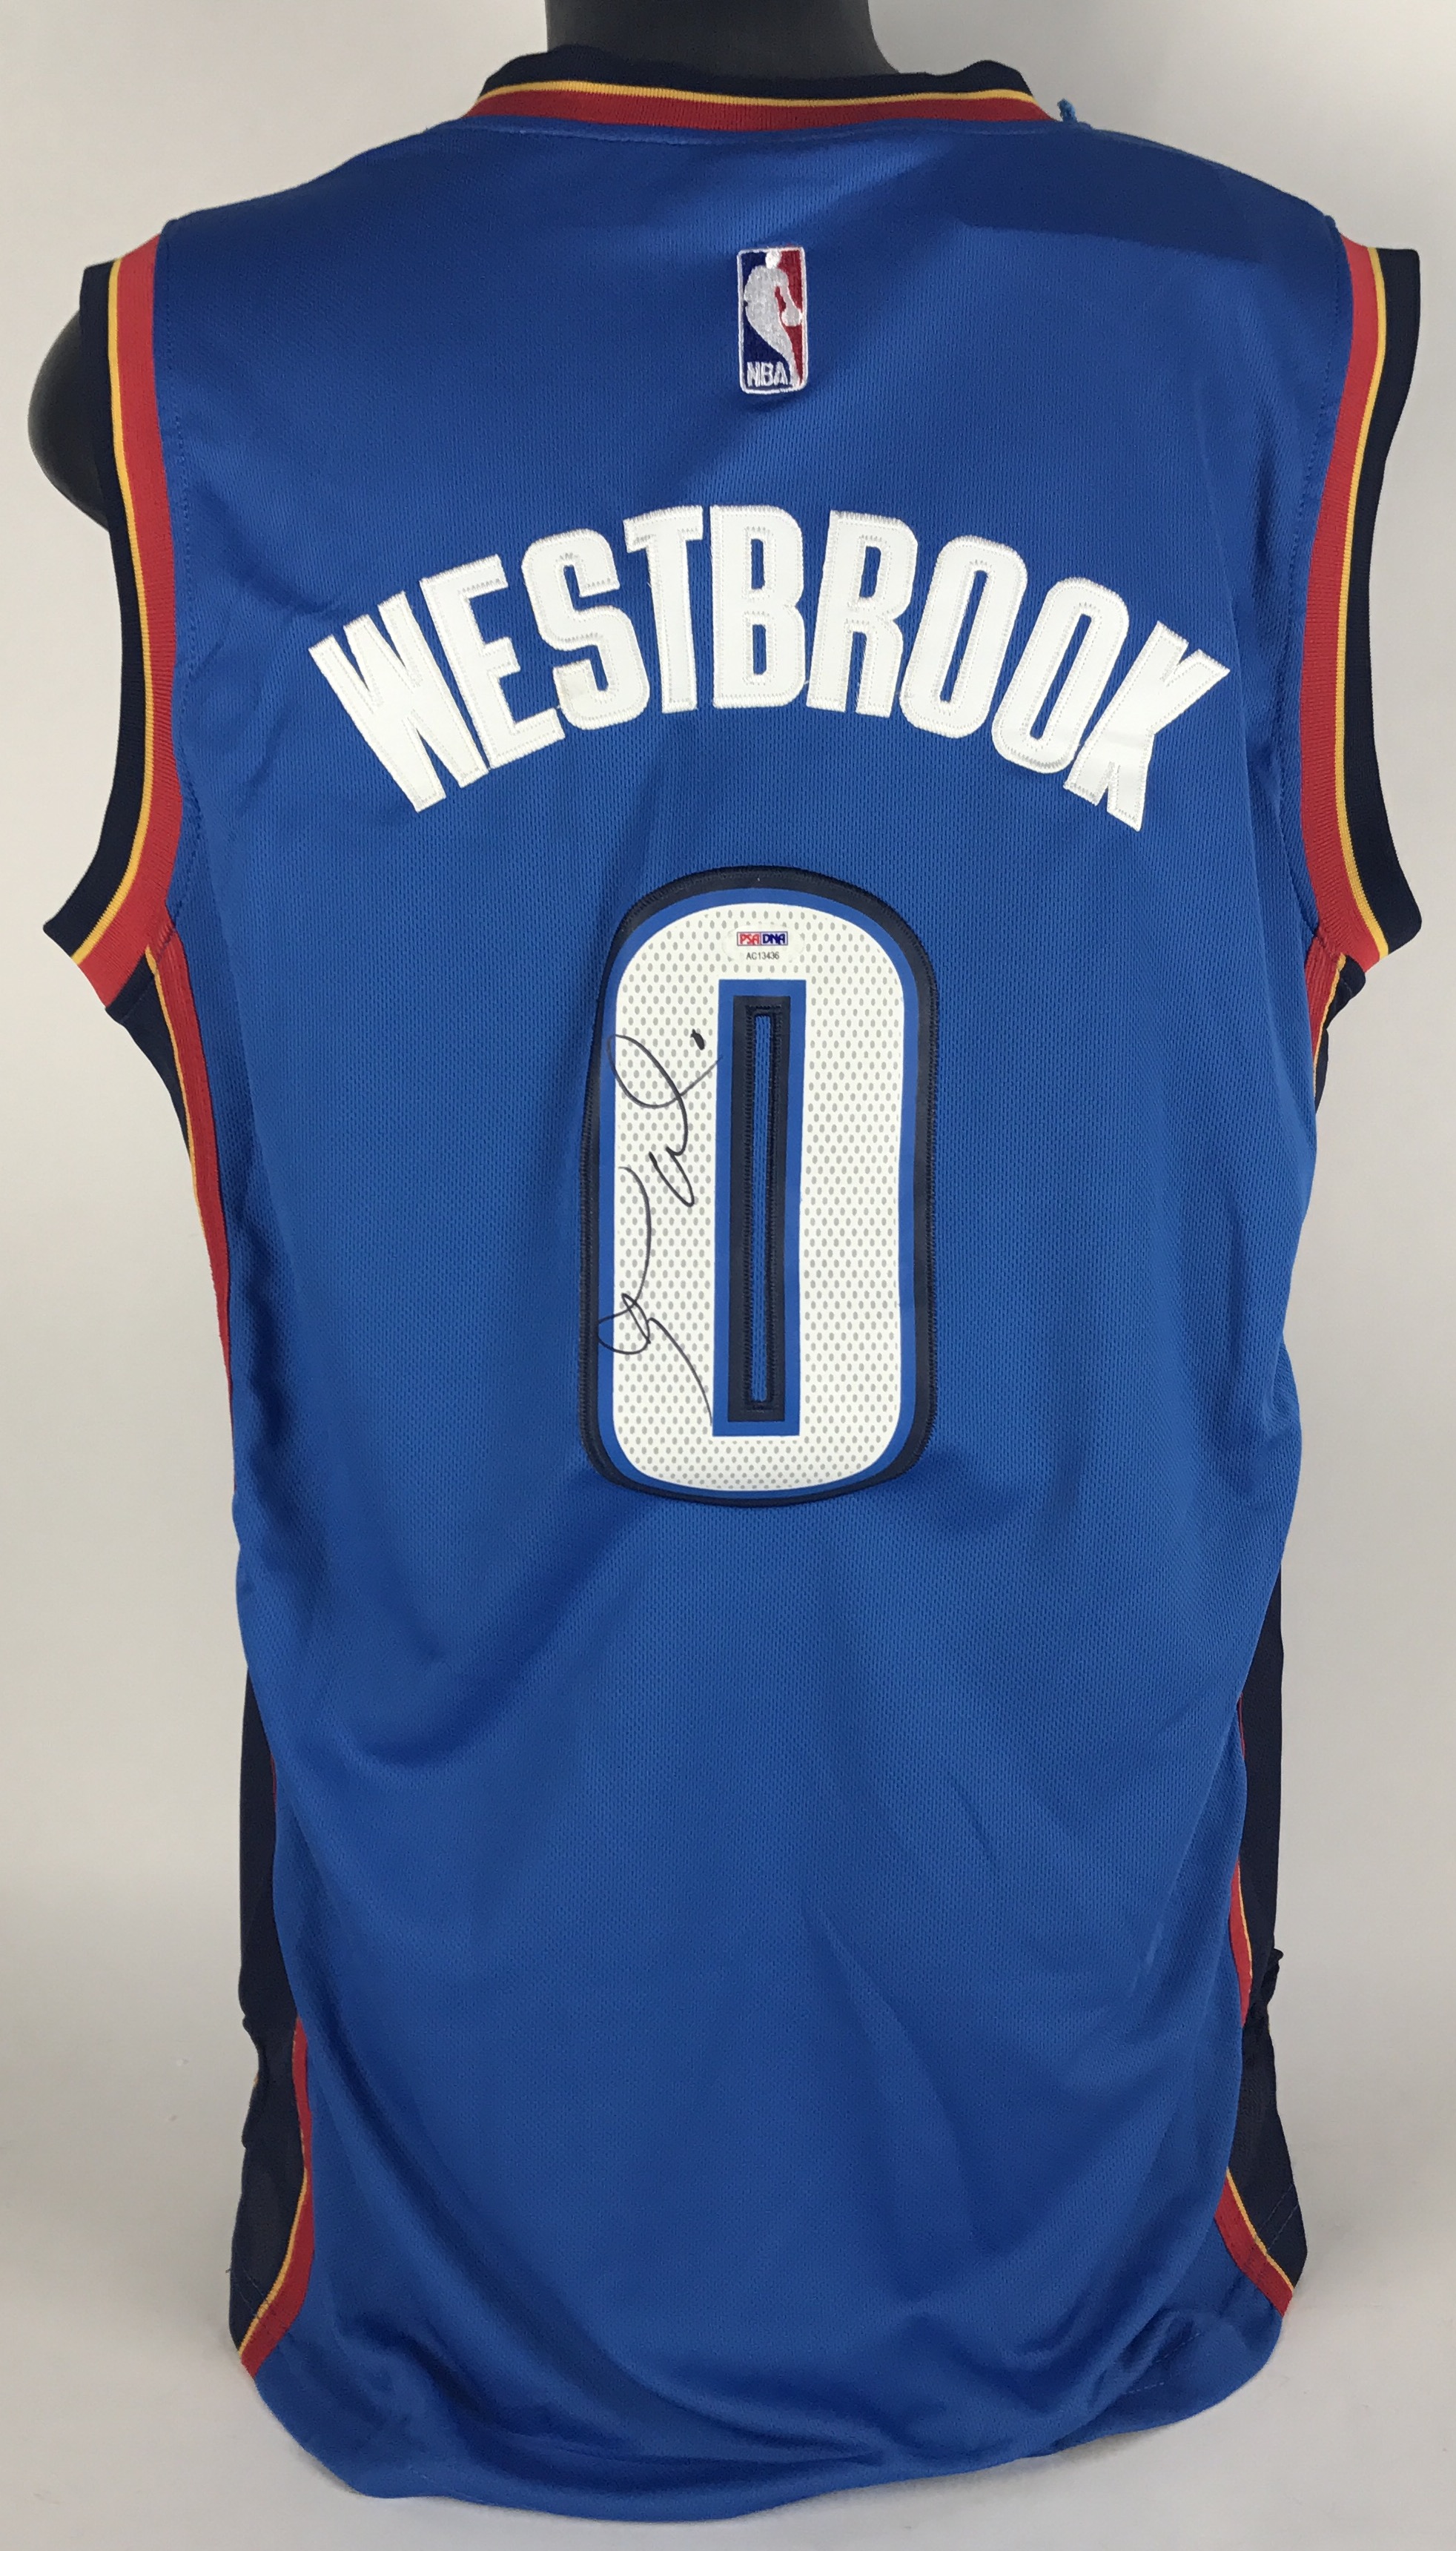 Russell Westbrook Autographed Signed #0 Okc Thunder Jersey Framed PSA